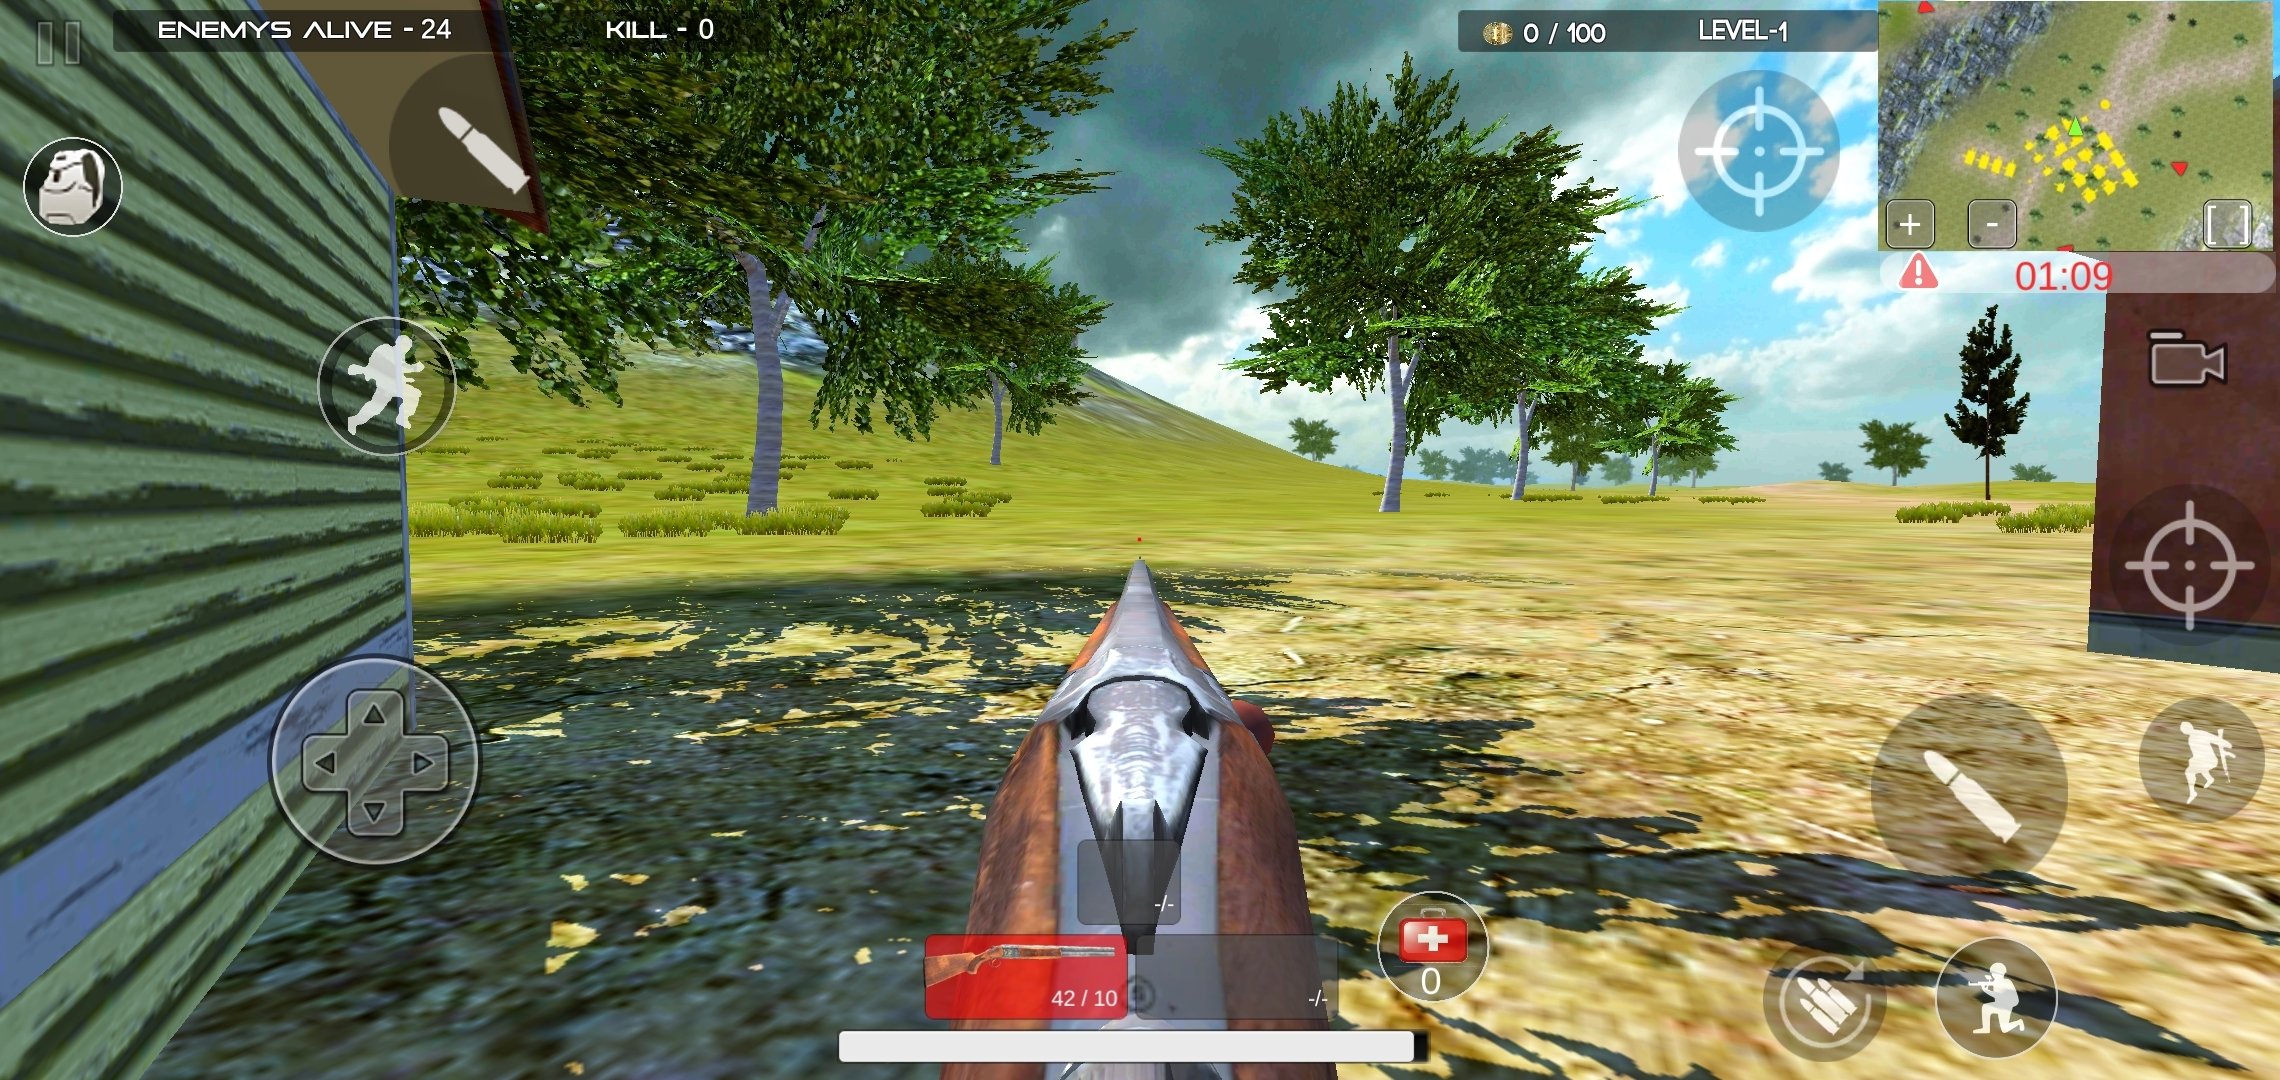 Free Fire – Battlegrounds - MMO Square